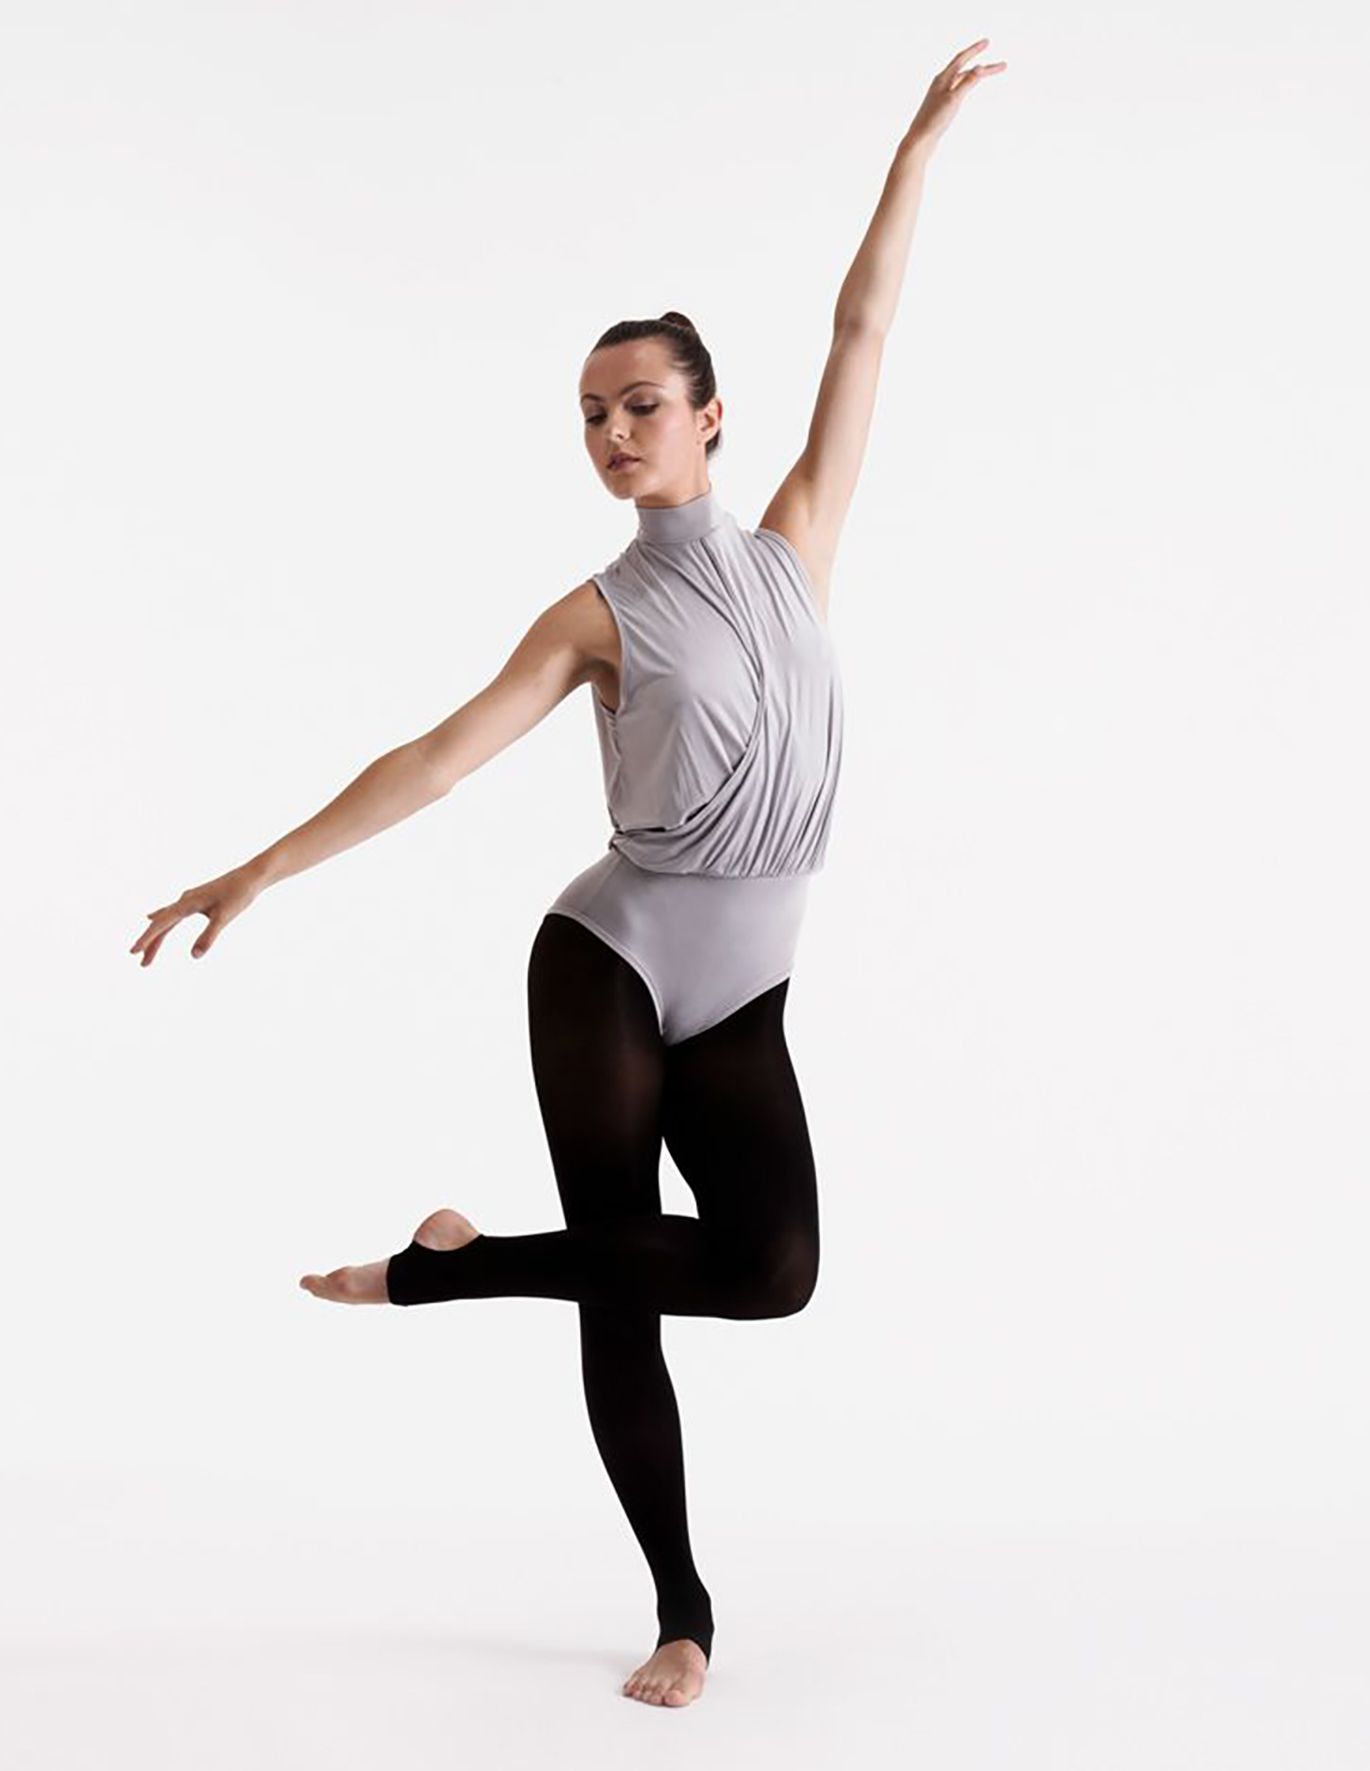 Tights for Dark Skin? Nude Tights For Dancers and Skaters. – My